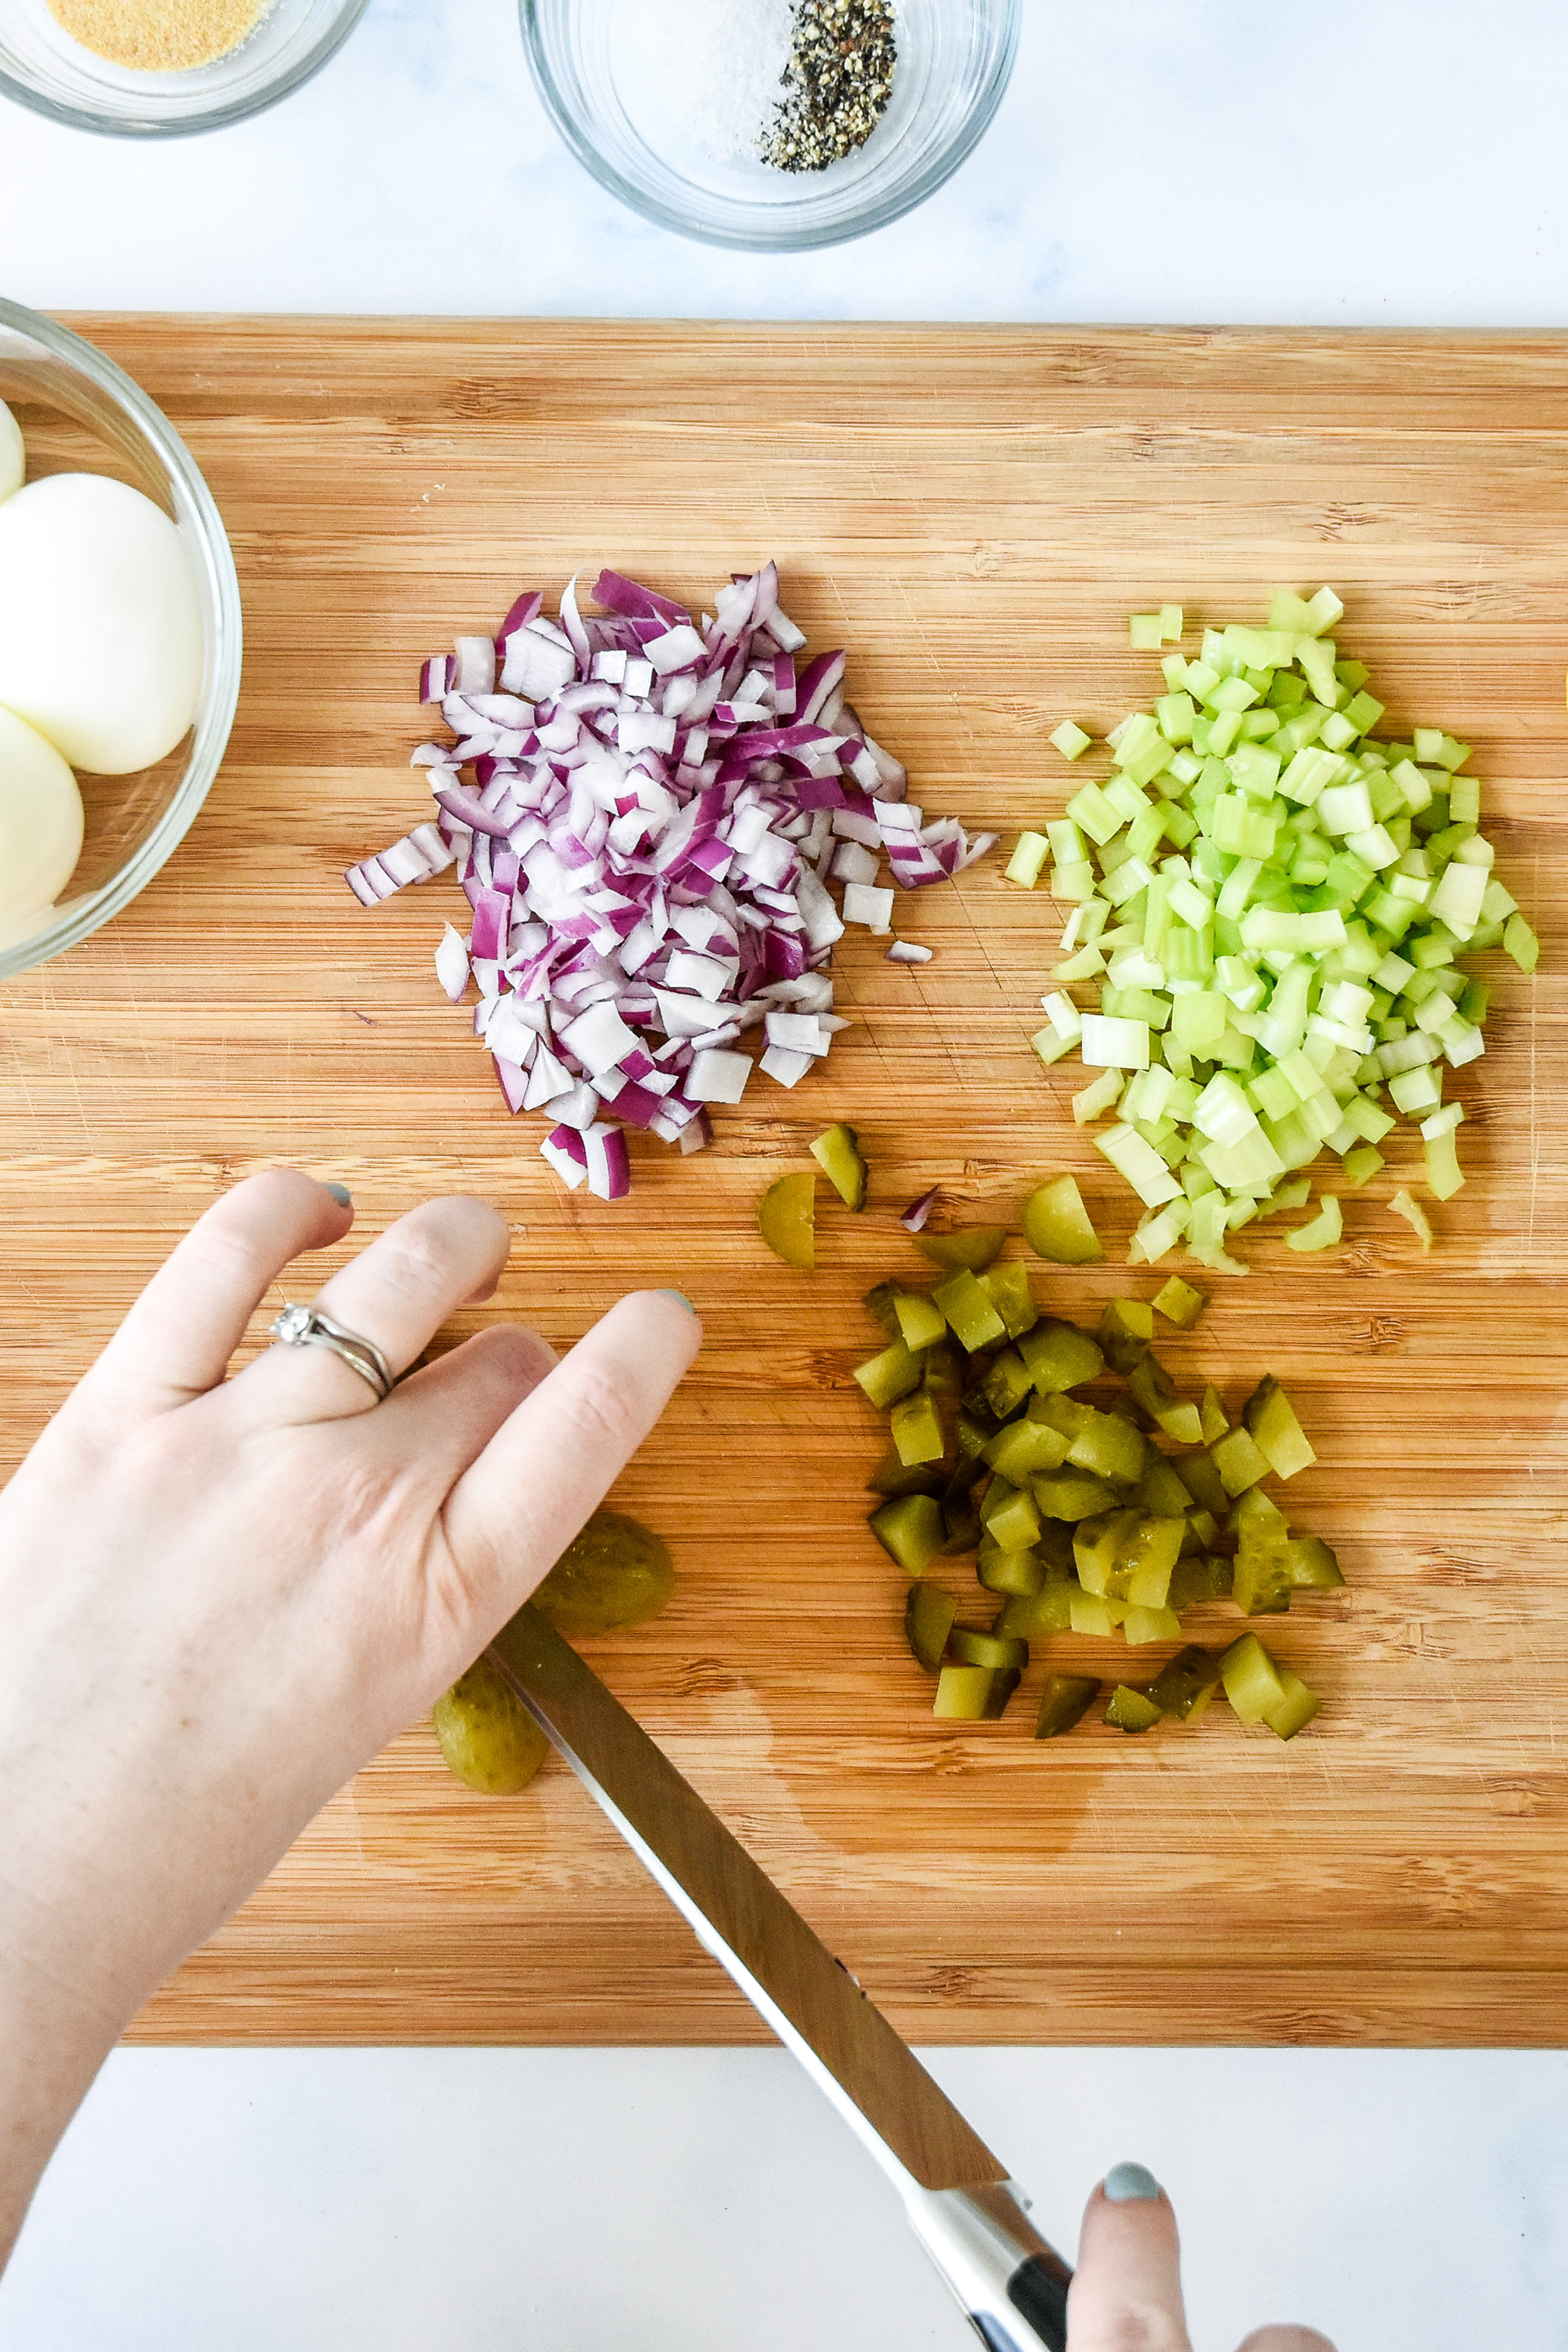 dicing and chopping the pickle and onion for tuna egg salad.